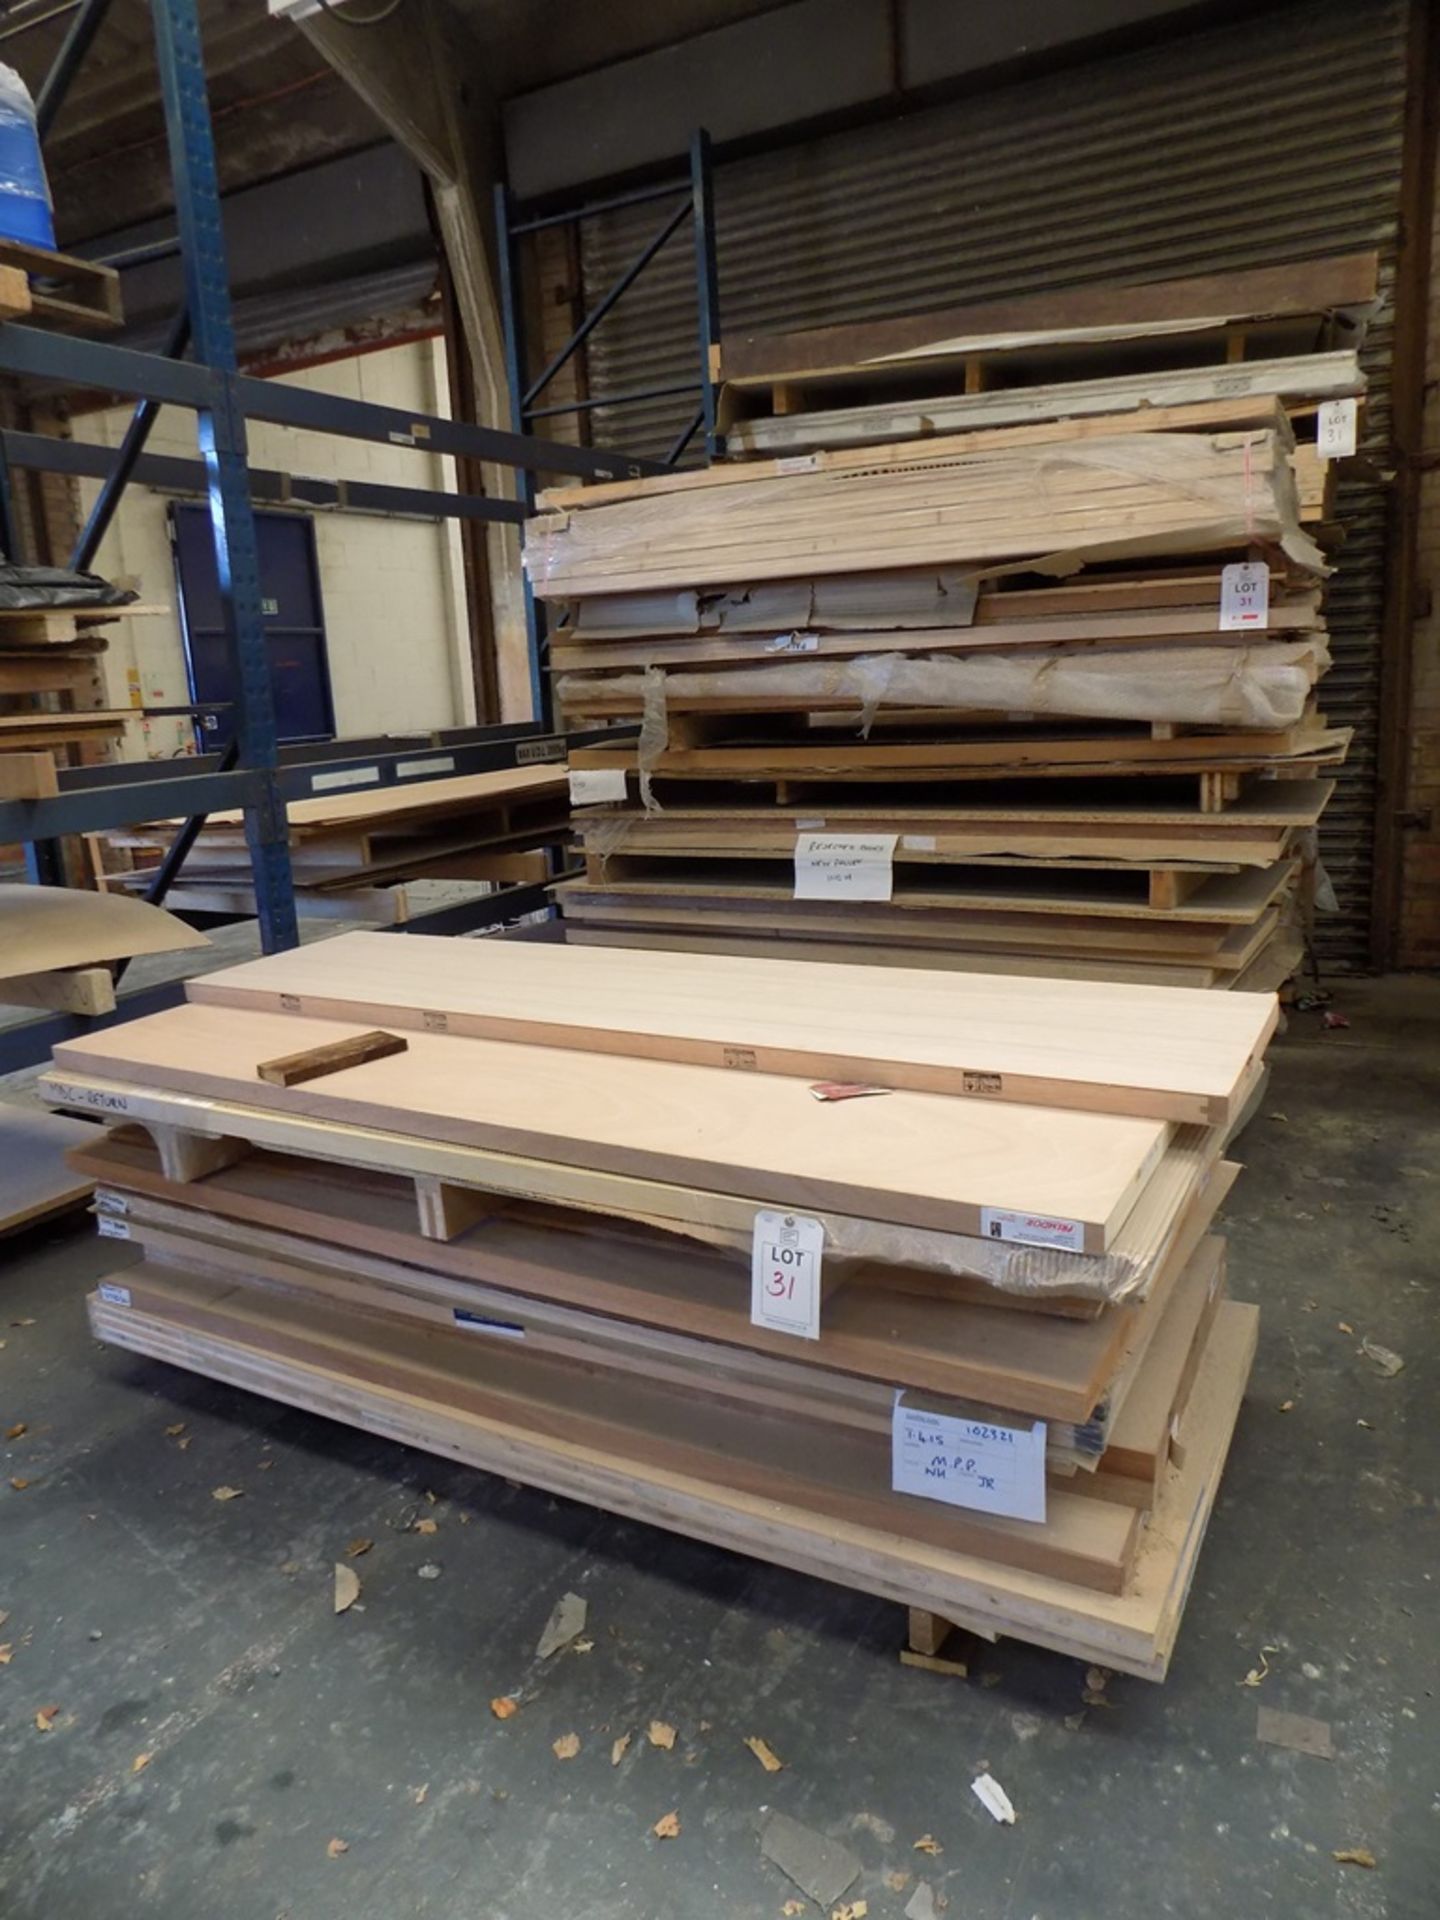 3 stacks of doors and door blanks, as lotted